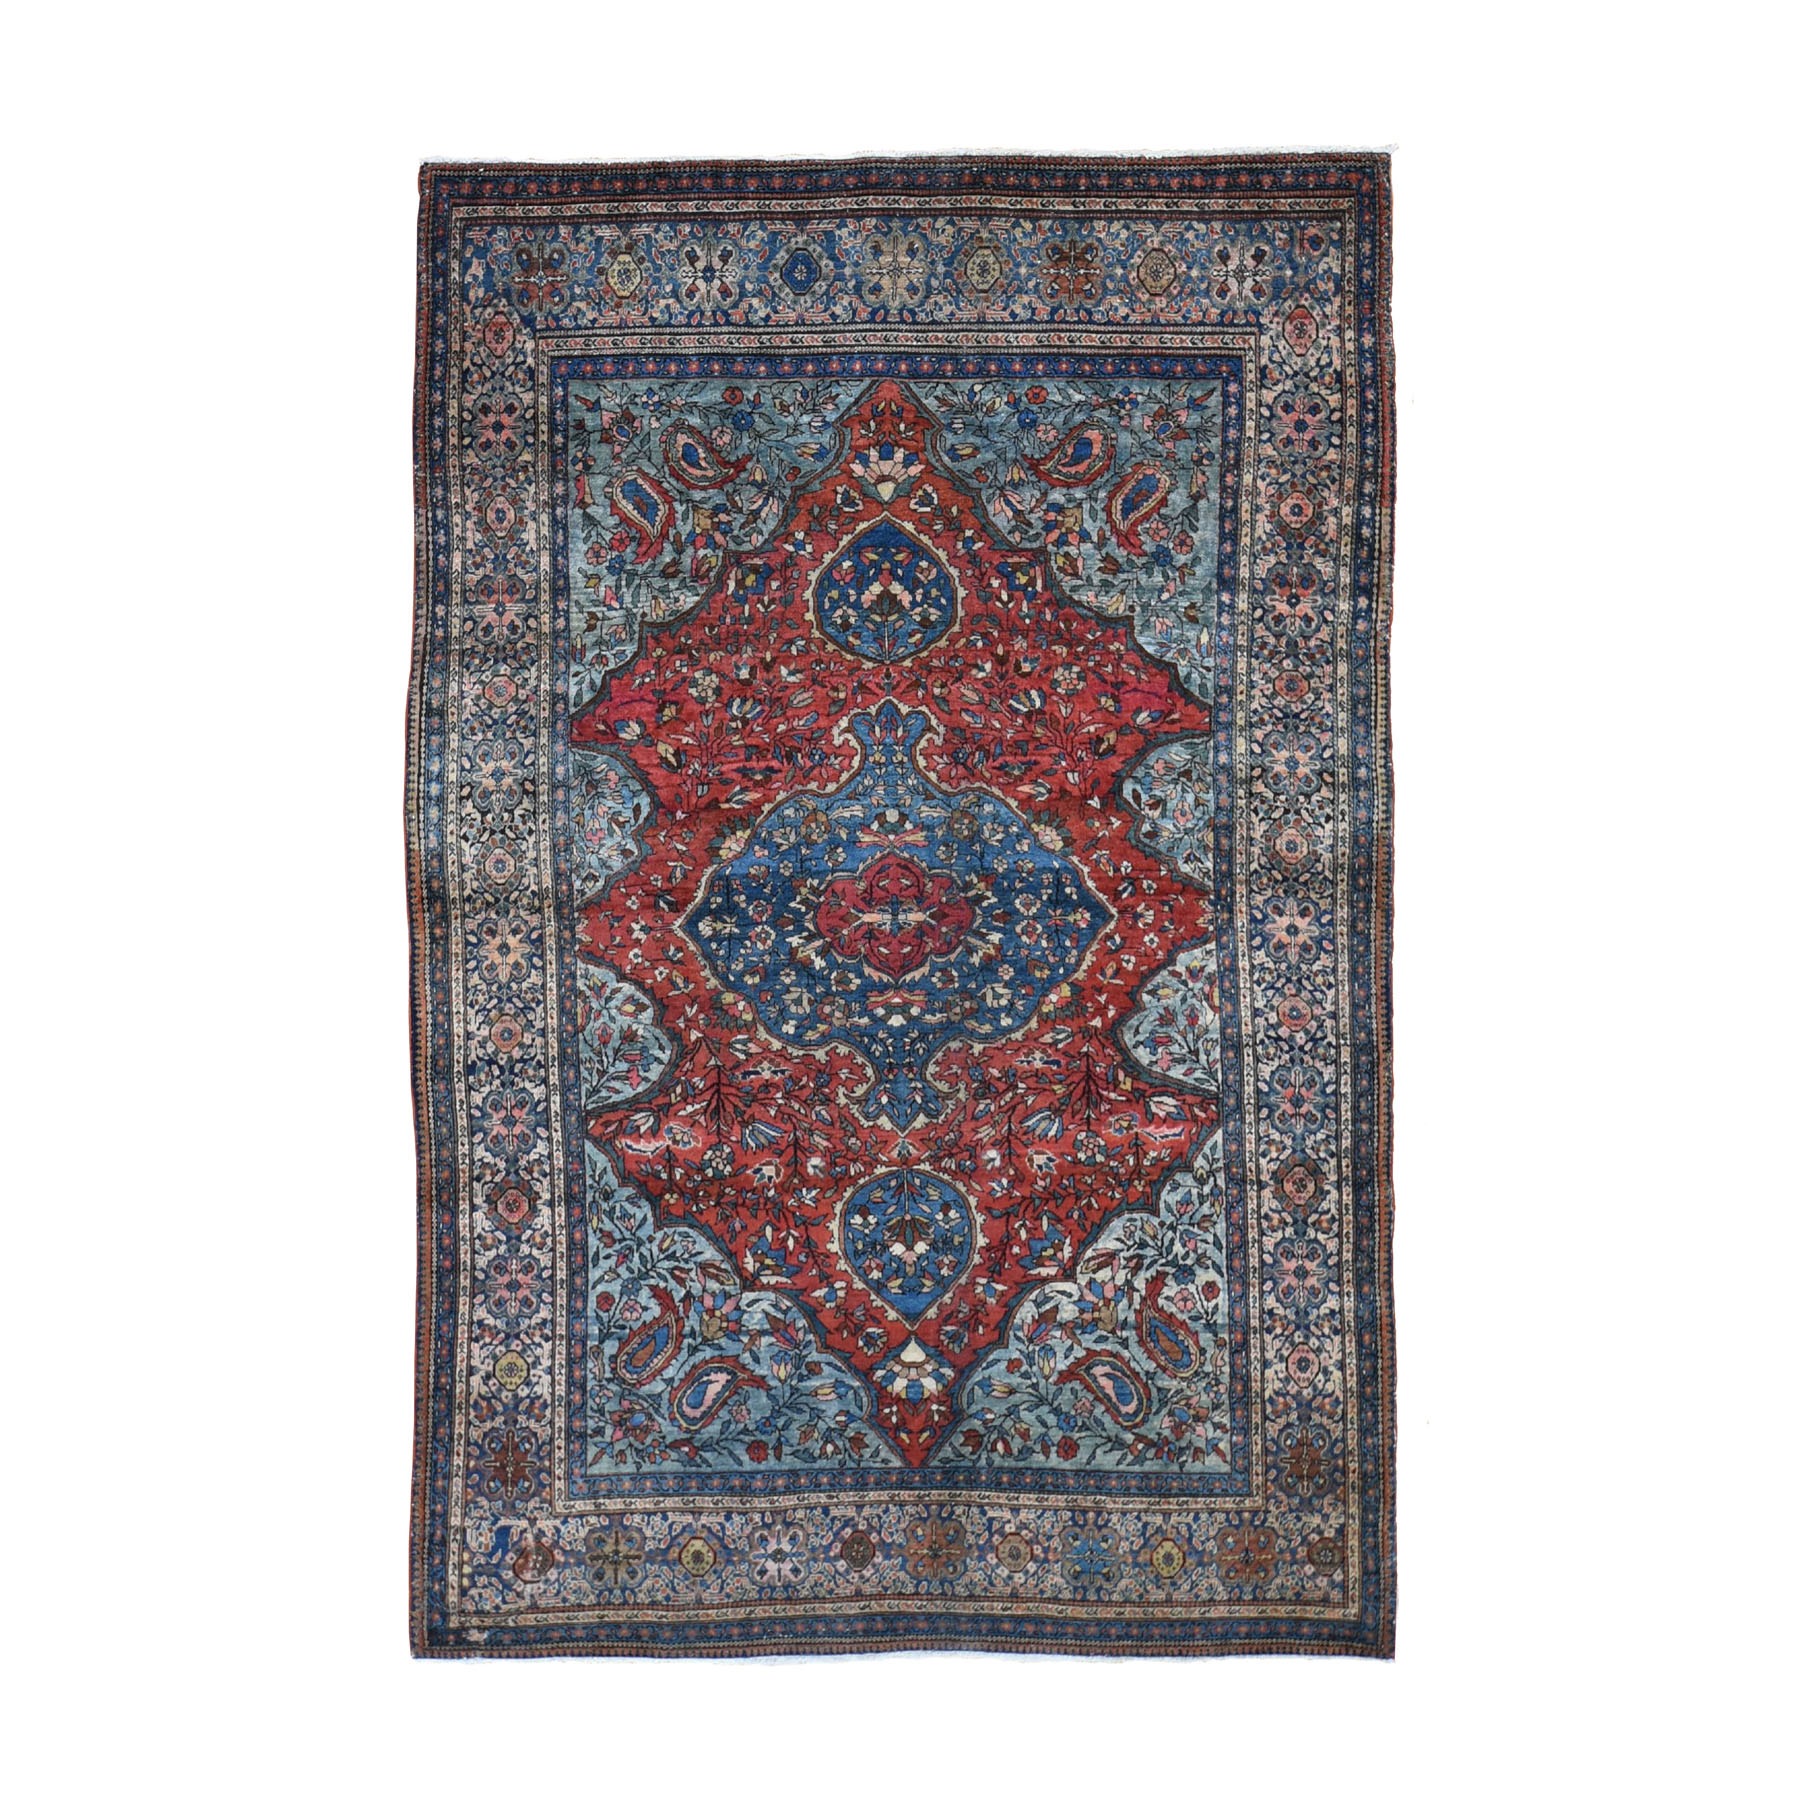 4'2"x6'6" Red Antique  Persian Sarouk Fereghan Good Condition Soft Hand Woven Fine Oriental Rug 